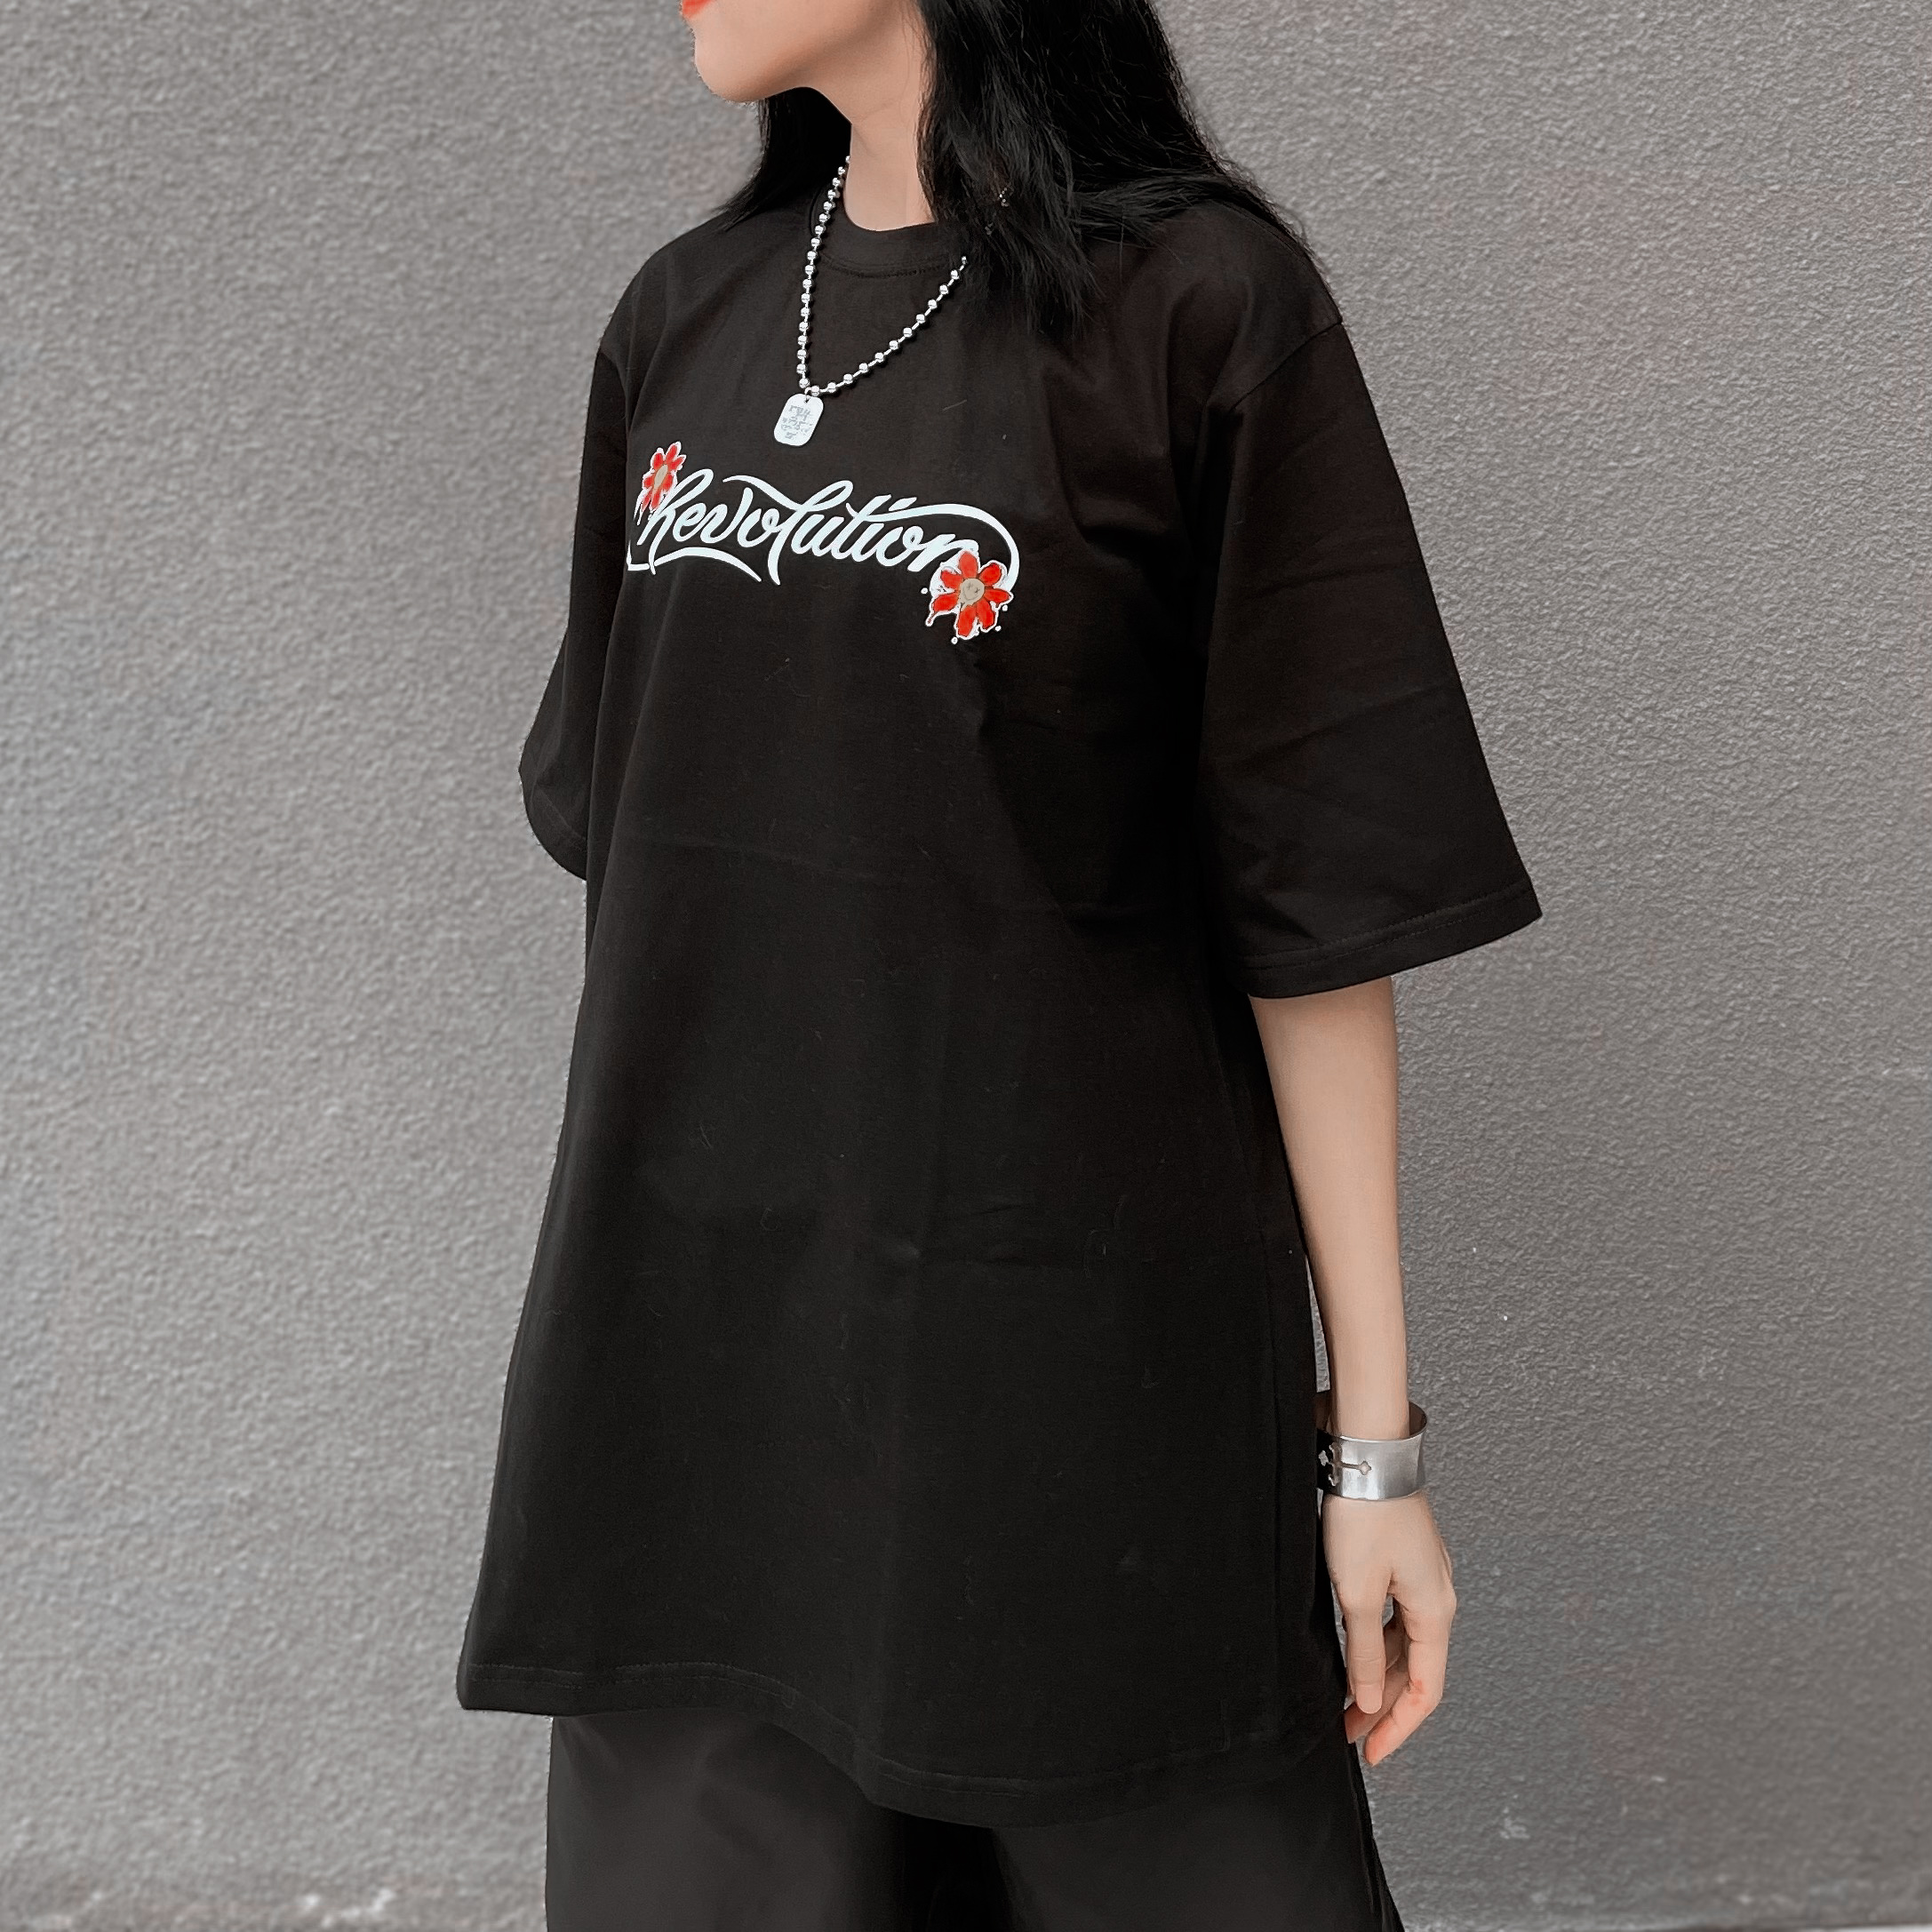 9. Life Is Good Black T-shirt OVERSIZE FIT